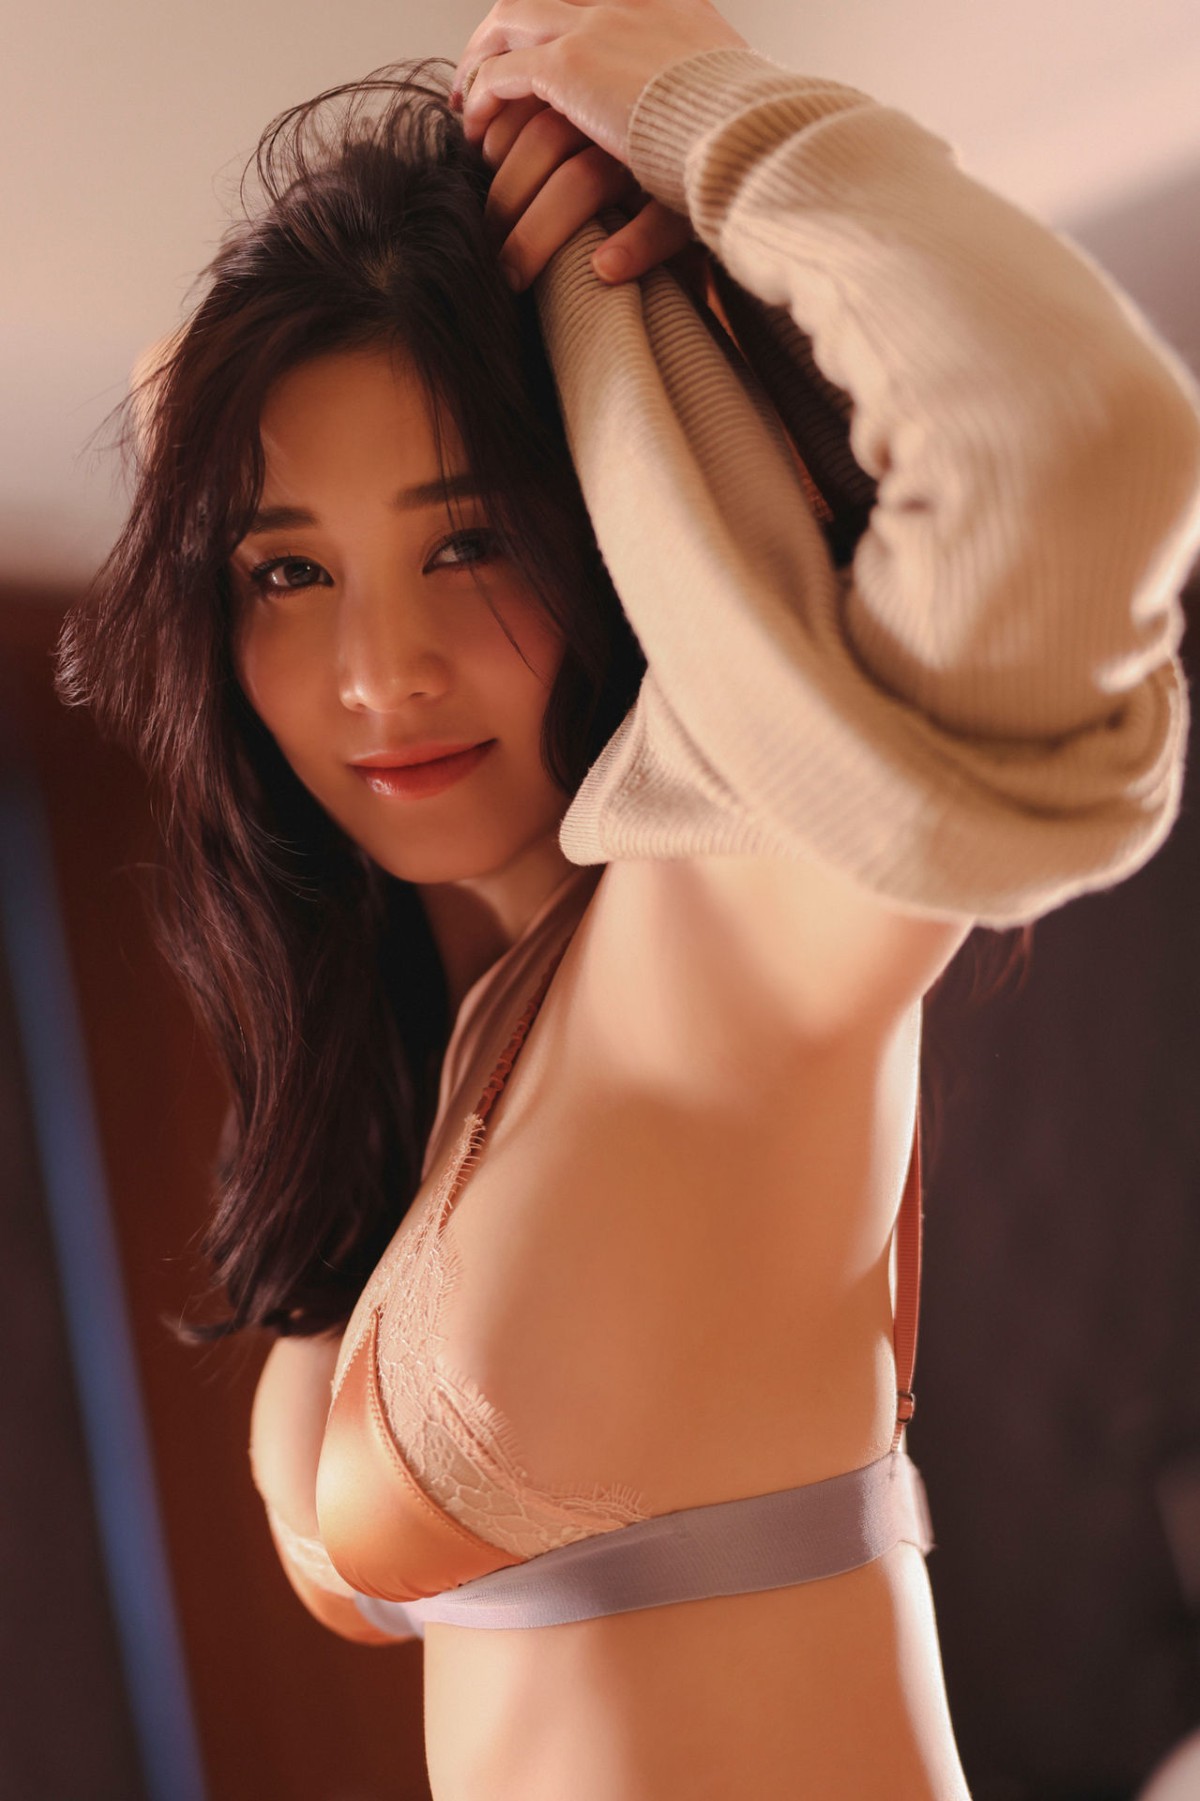 FRIDAY Digital Photobook 2023 02 10 Rin Takahashi 高橋凛 In A Suite Room With An I Cup Beauty Vol 2 0009 3108854694.jpg